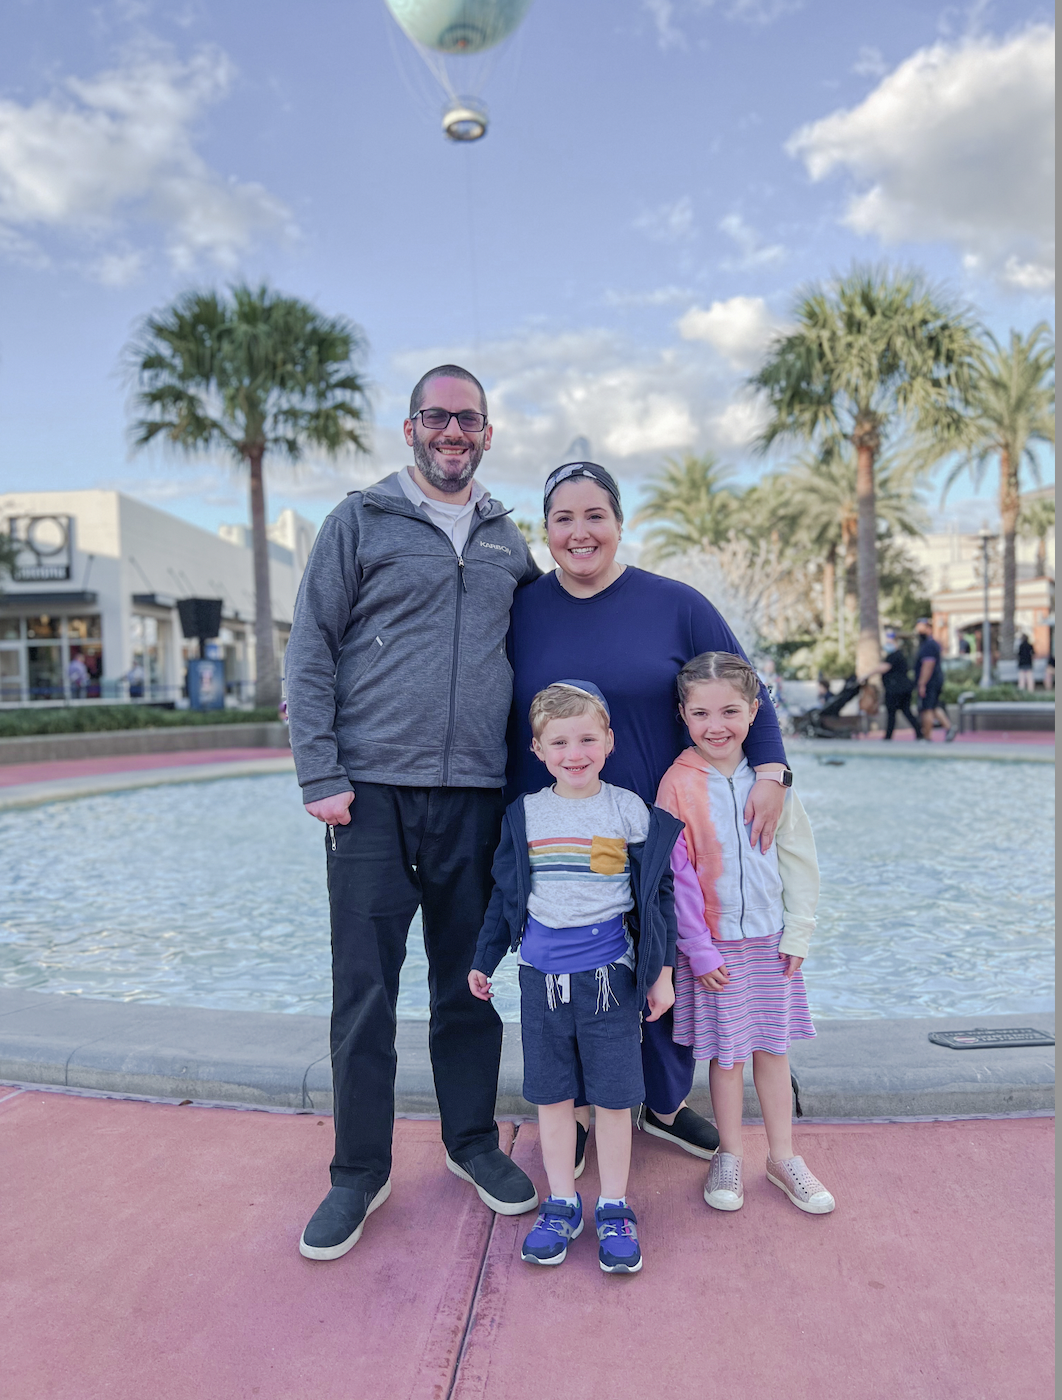 Orlando Family Trip Itinerary and Resources